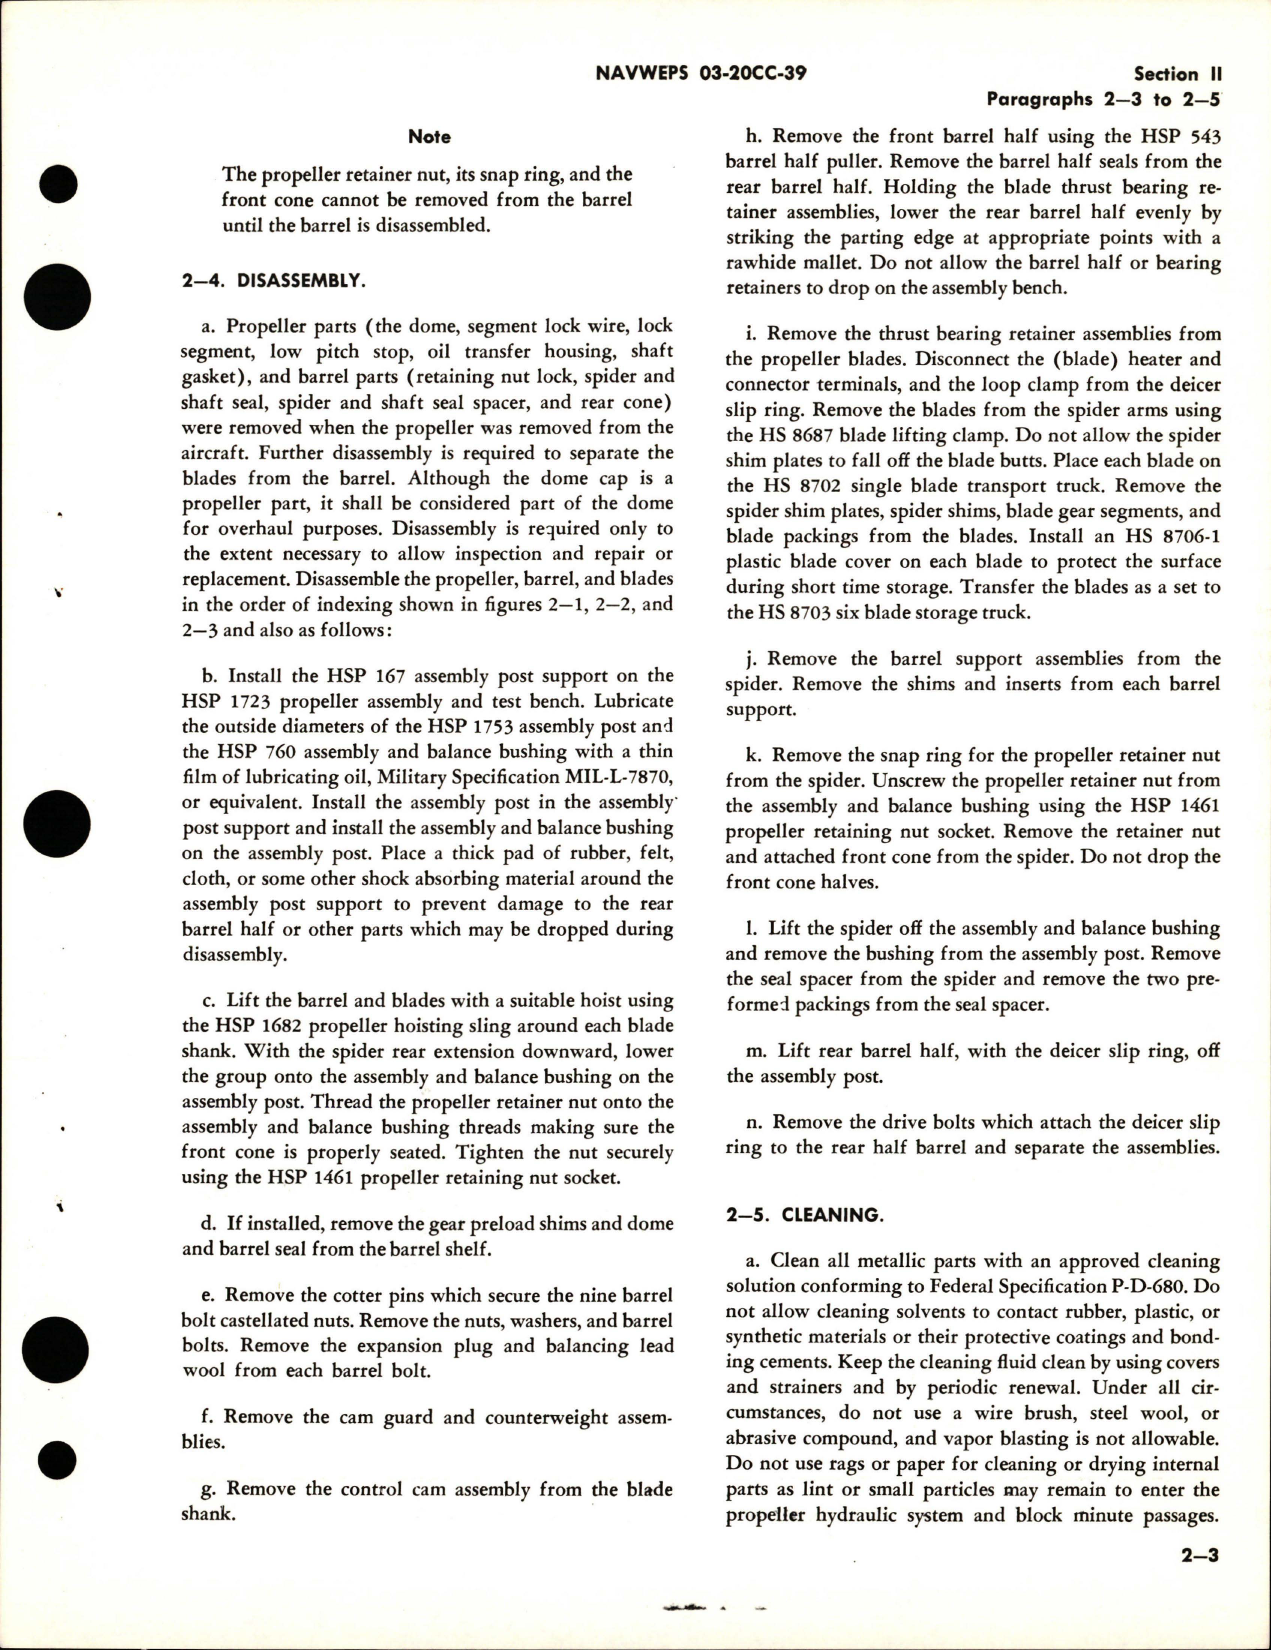 Sample page 9 from AirCorps Library document: Overhaul Instructions for Variable Pitch Aircraft Propeller Assemblies